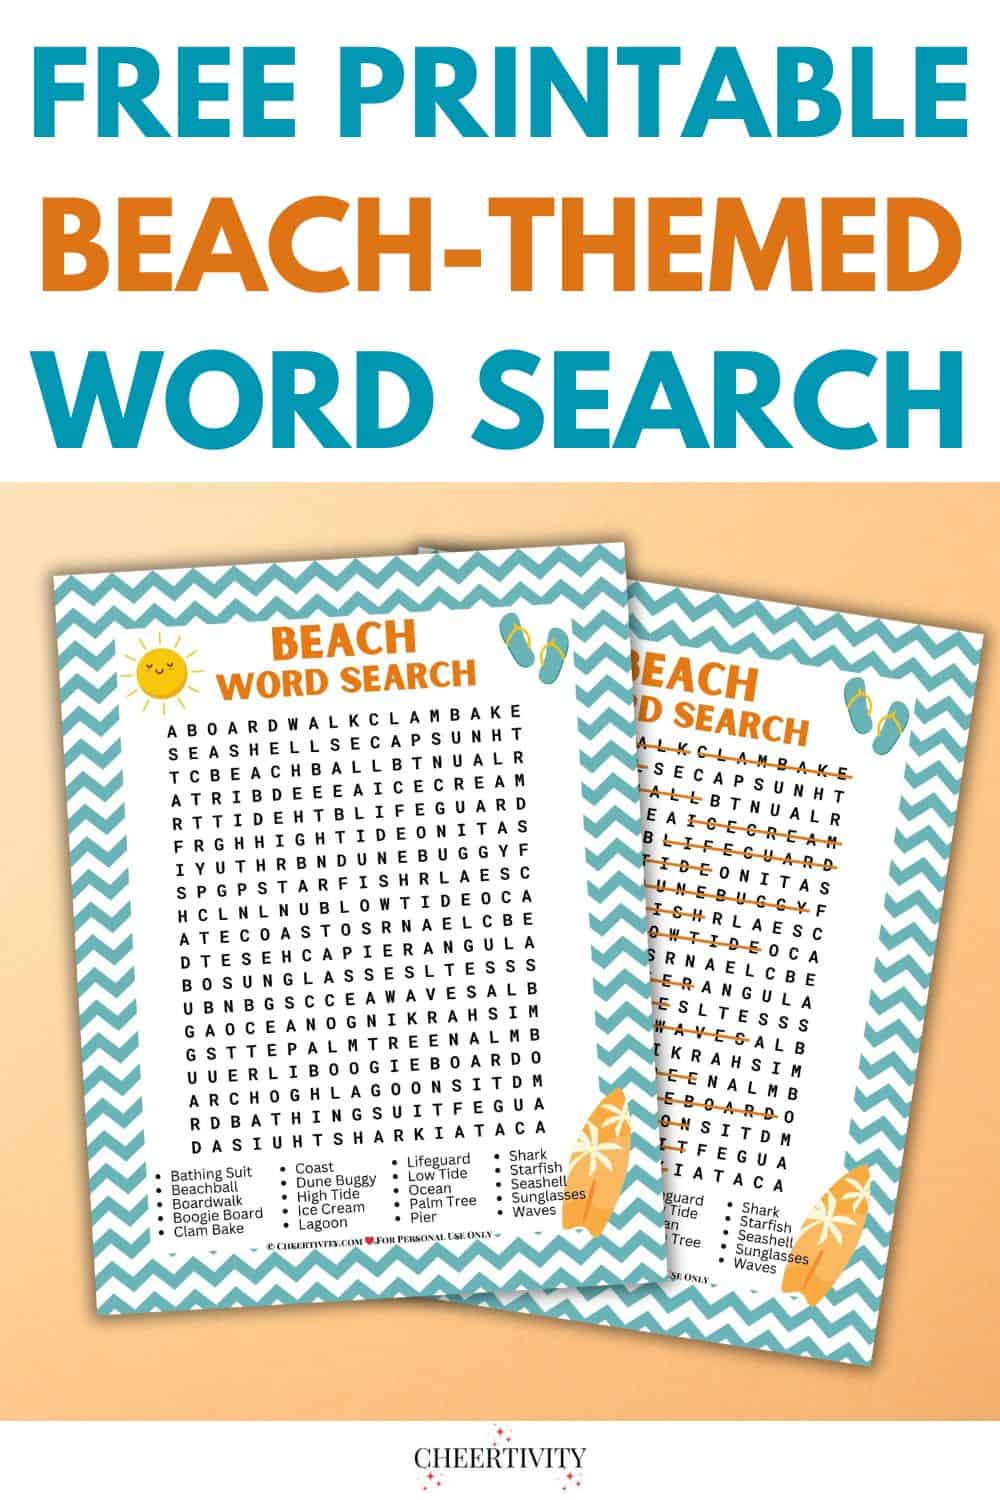 Free Printable Beach-Themed Word Search